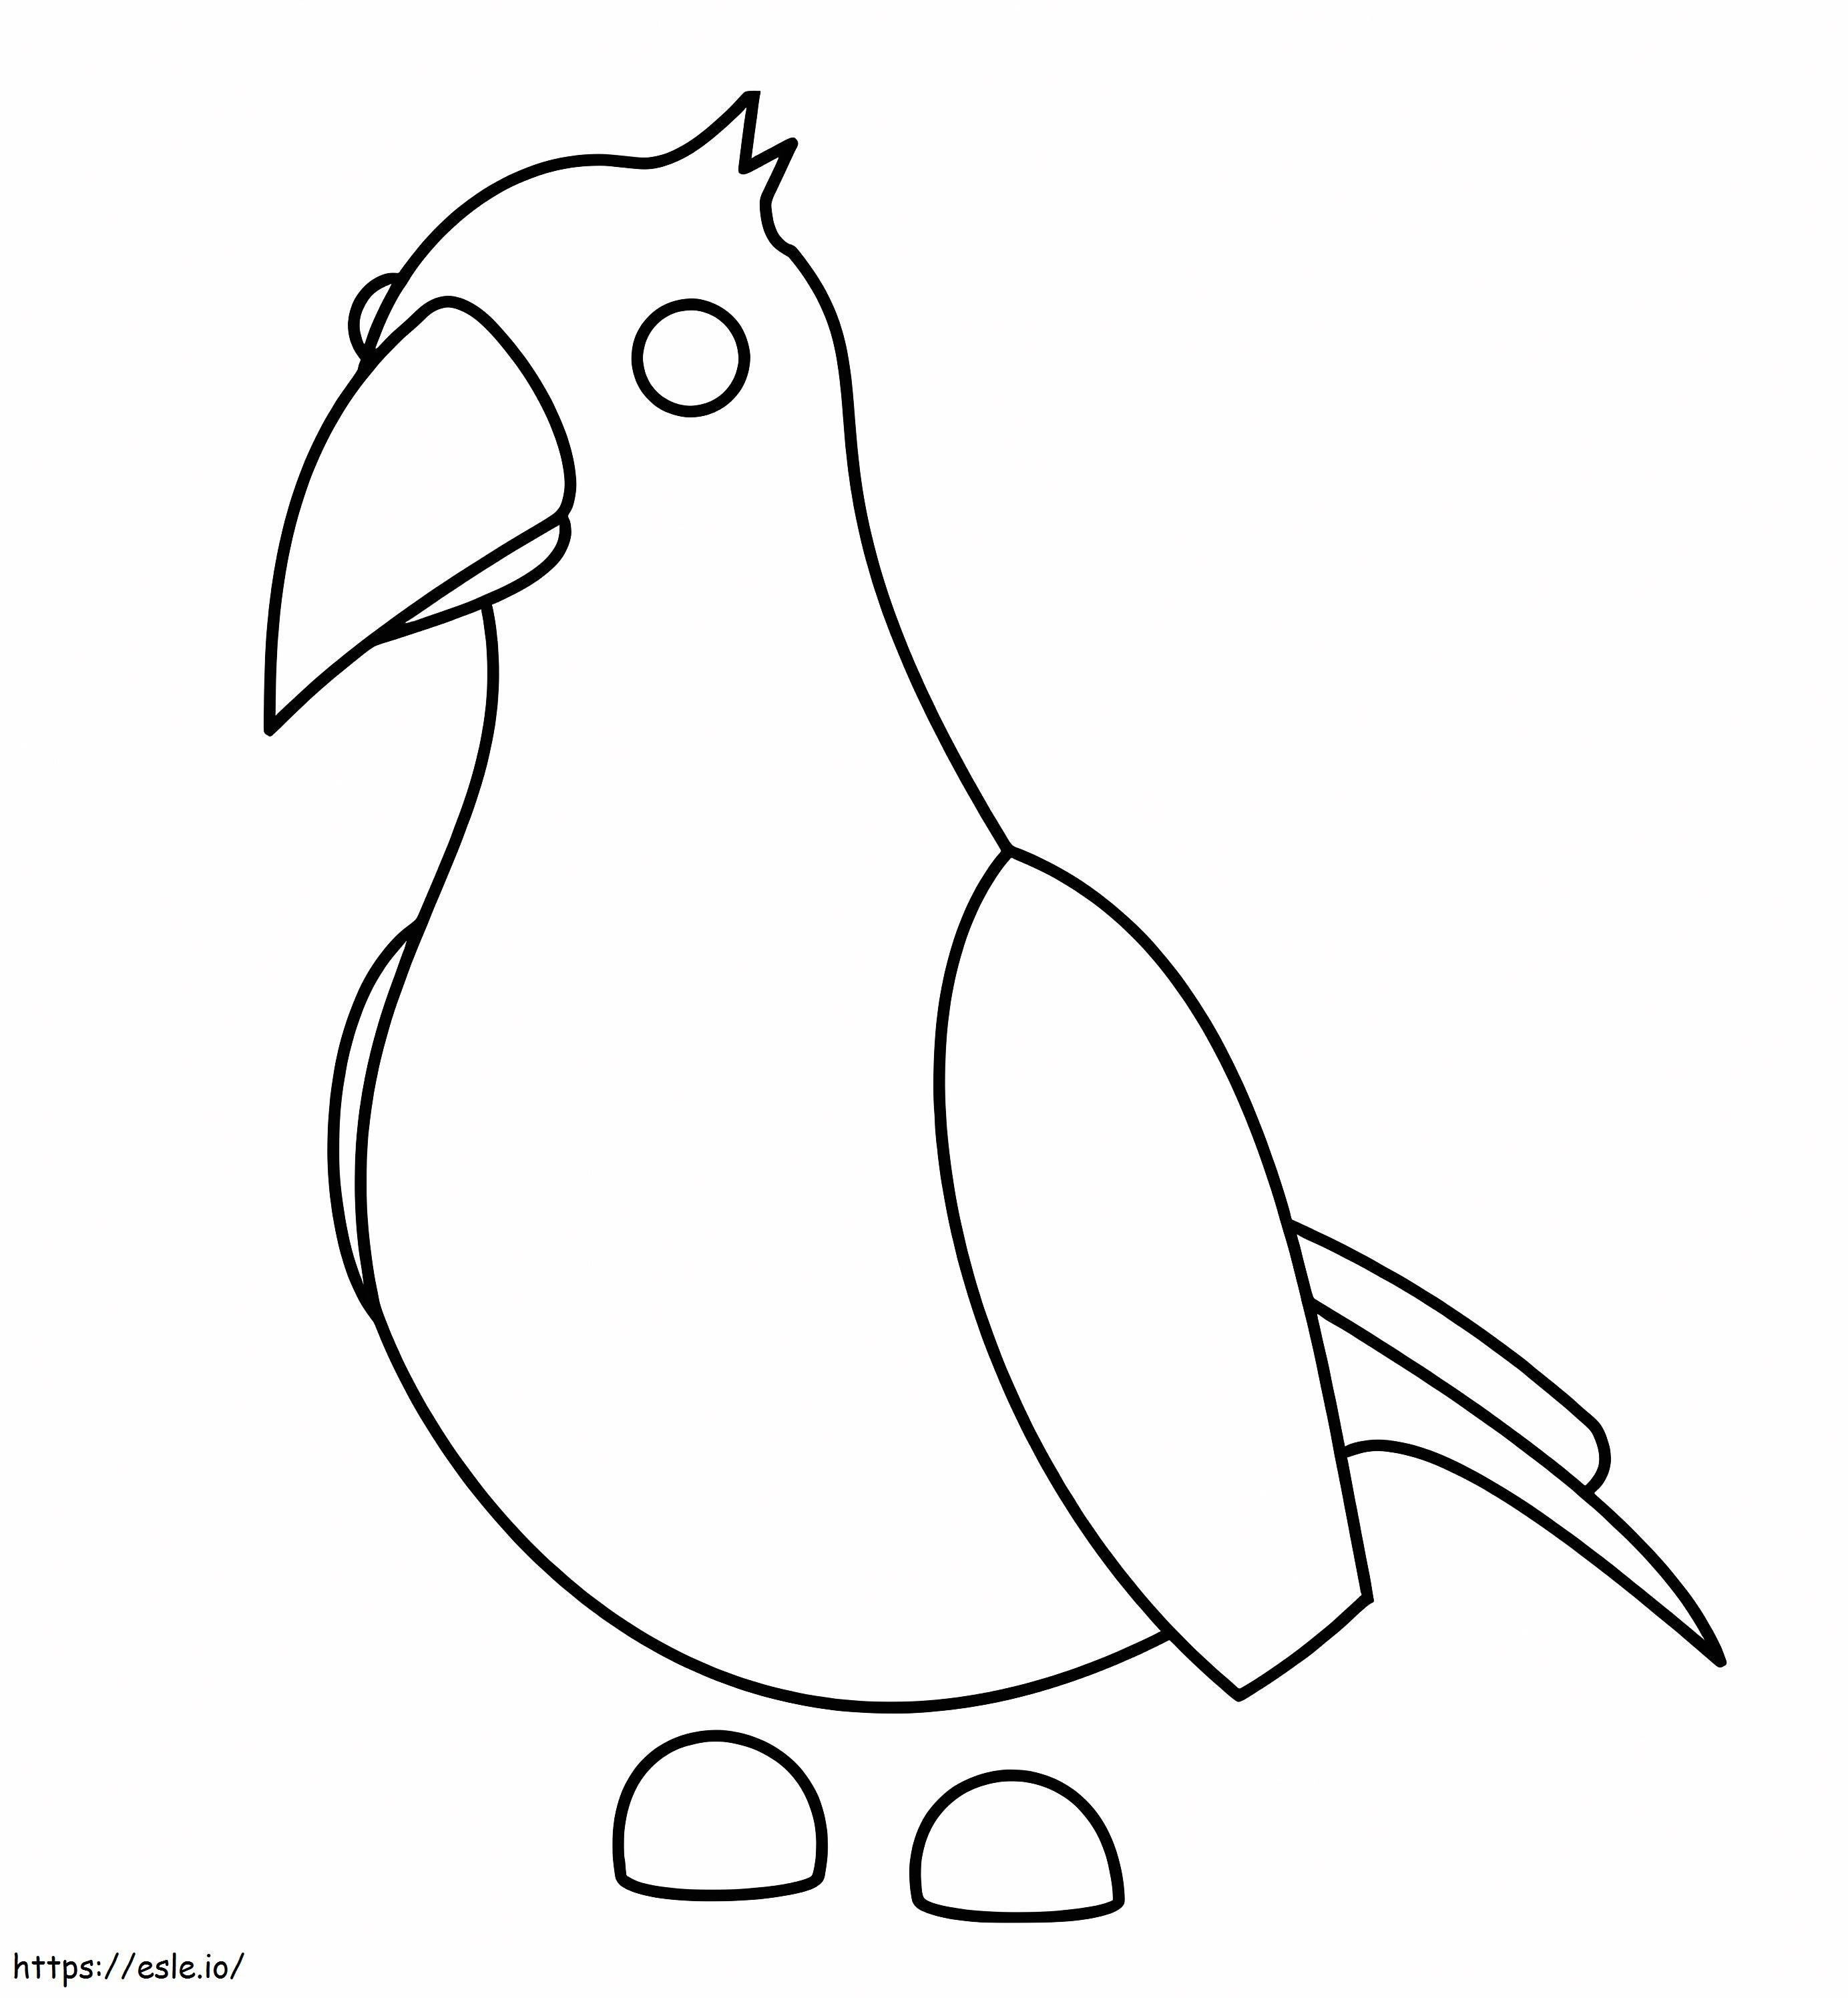 Crow Adopt Me coloring page